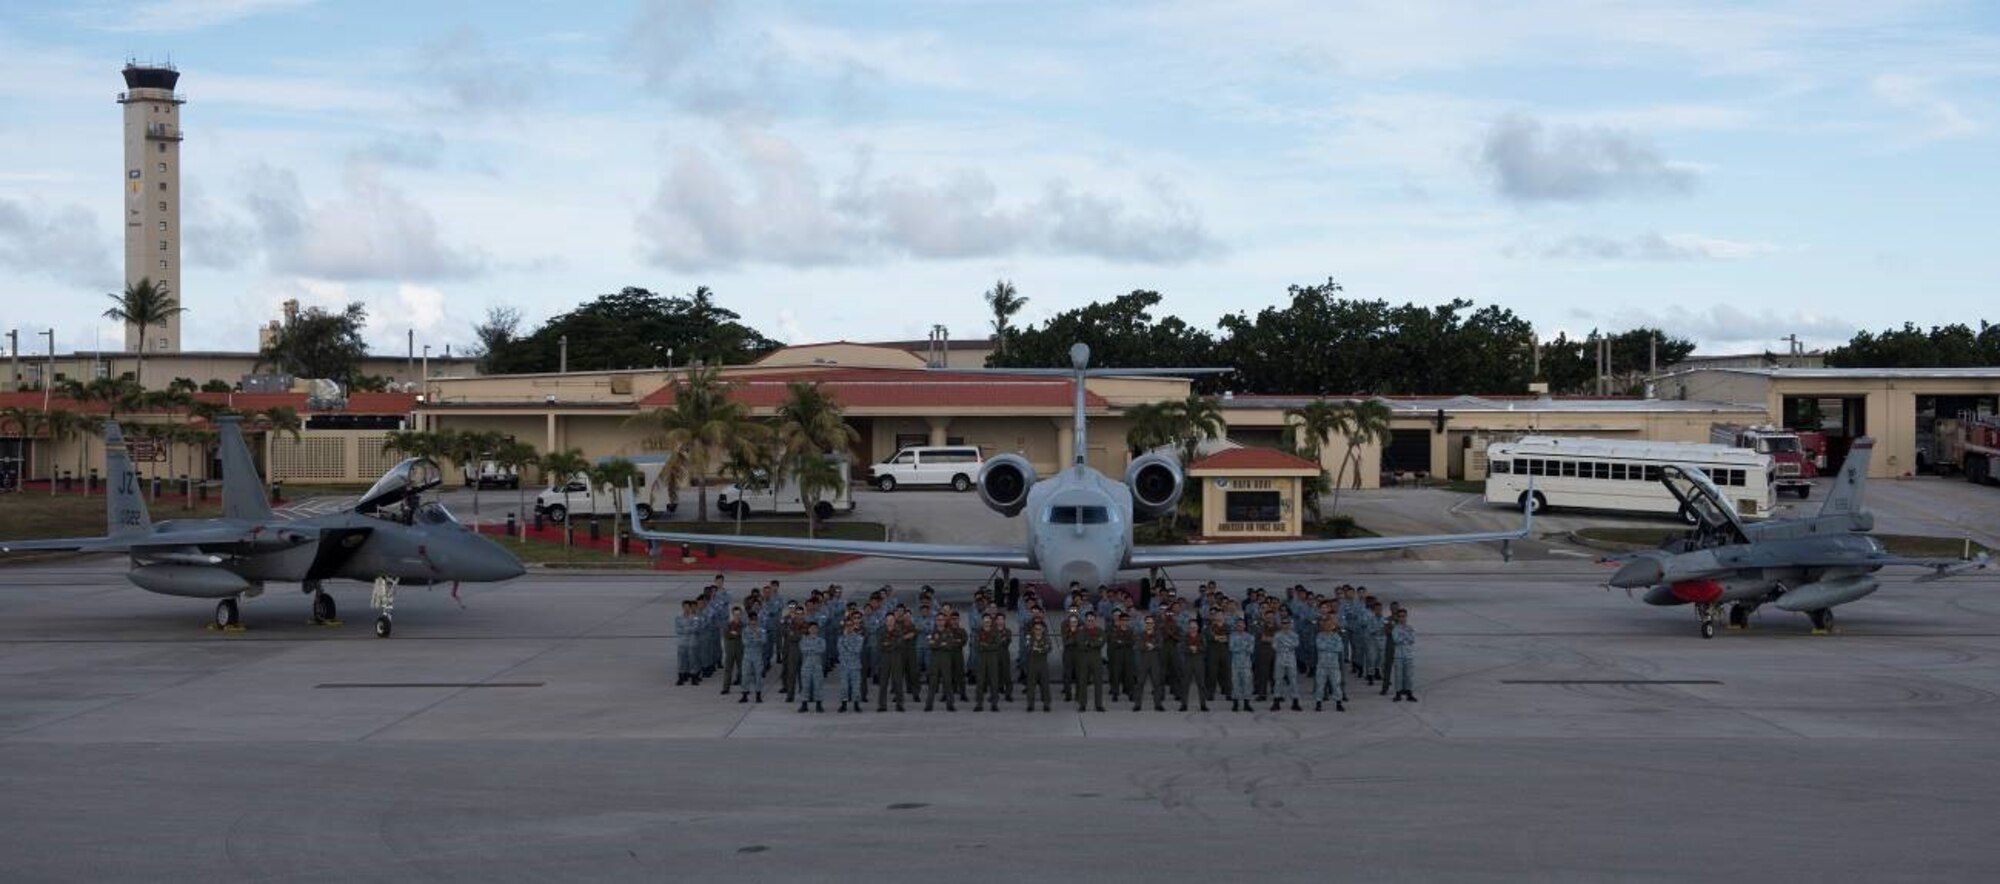 Republic of Singapore Air Force personnel stand in front of (from left to right) an F-15C Eagle from the 122nd Fighter Squadron from the 159th Fighter Wing of the New Orleans Air National Guard, Louisiana, and an RSAF G550 Airborne Early Warning aircraft and an RSAF F-16 at Andersen Air Force Base, Guam, July 9, 2019.